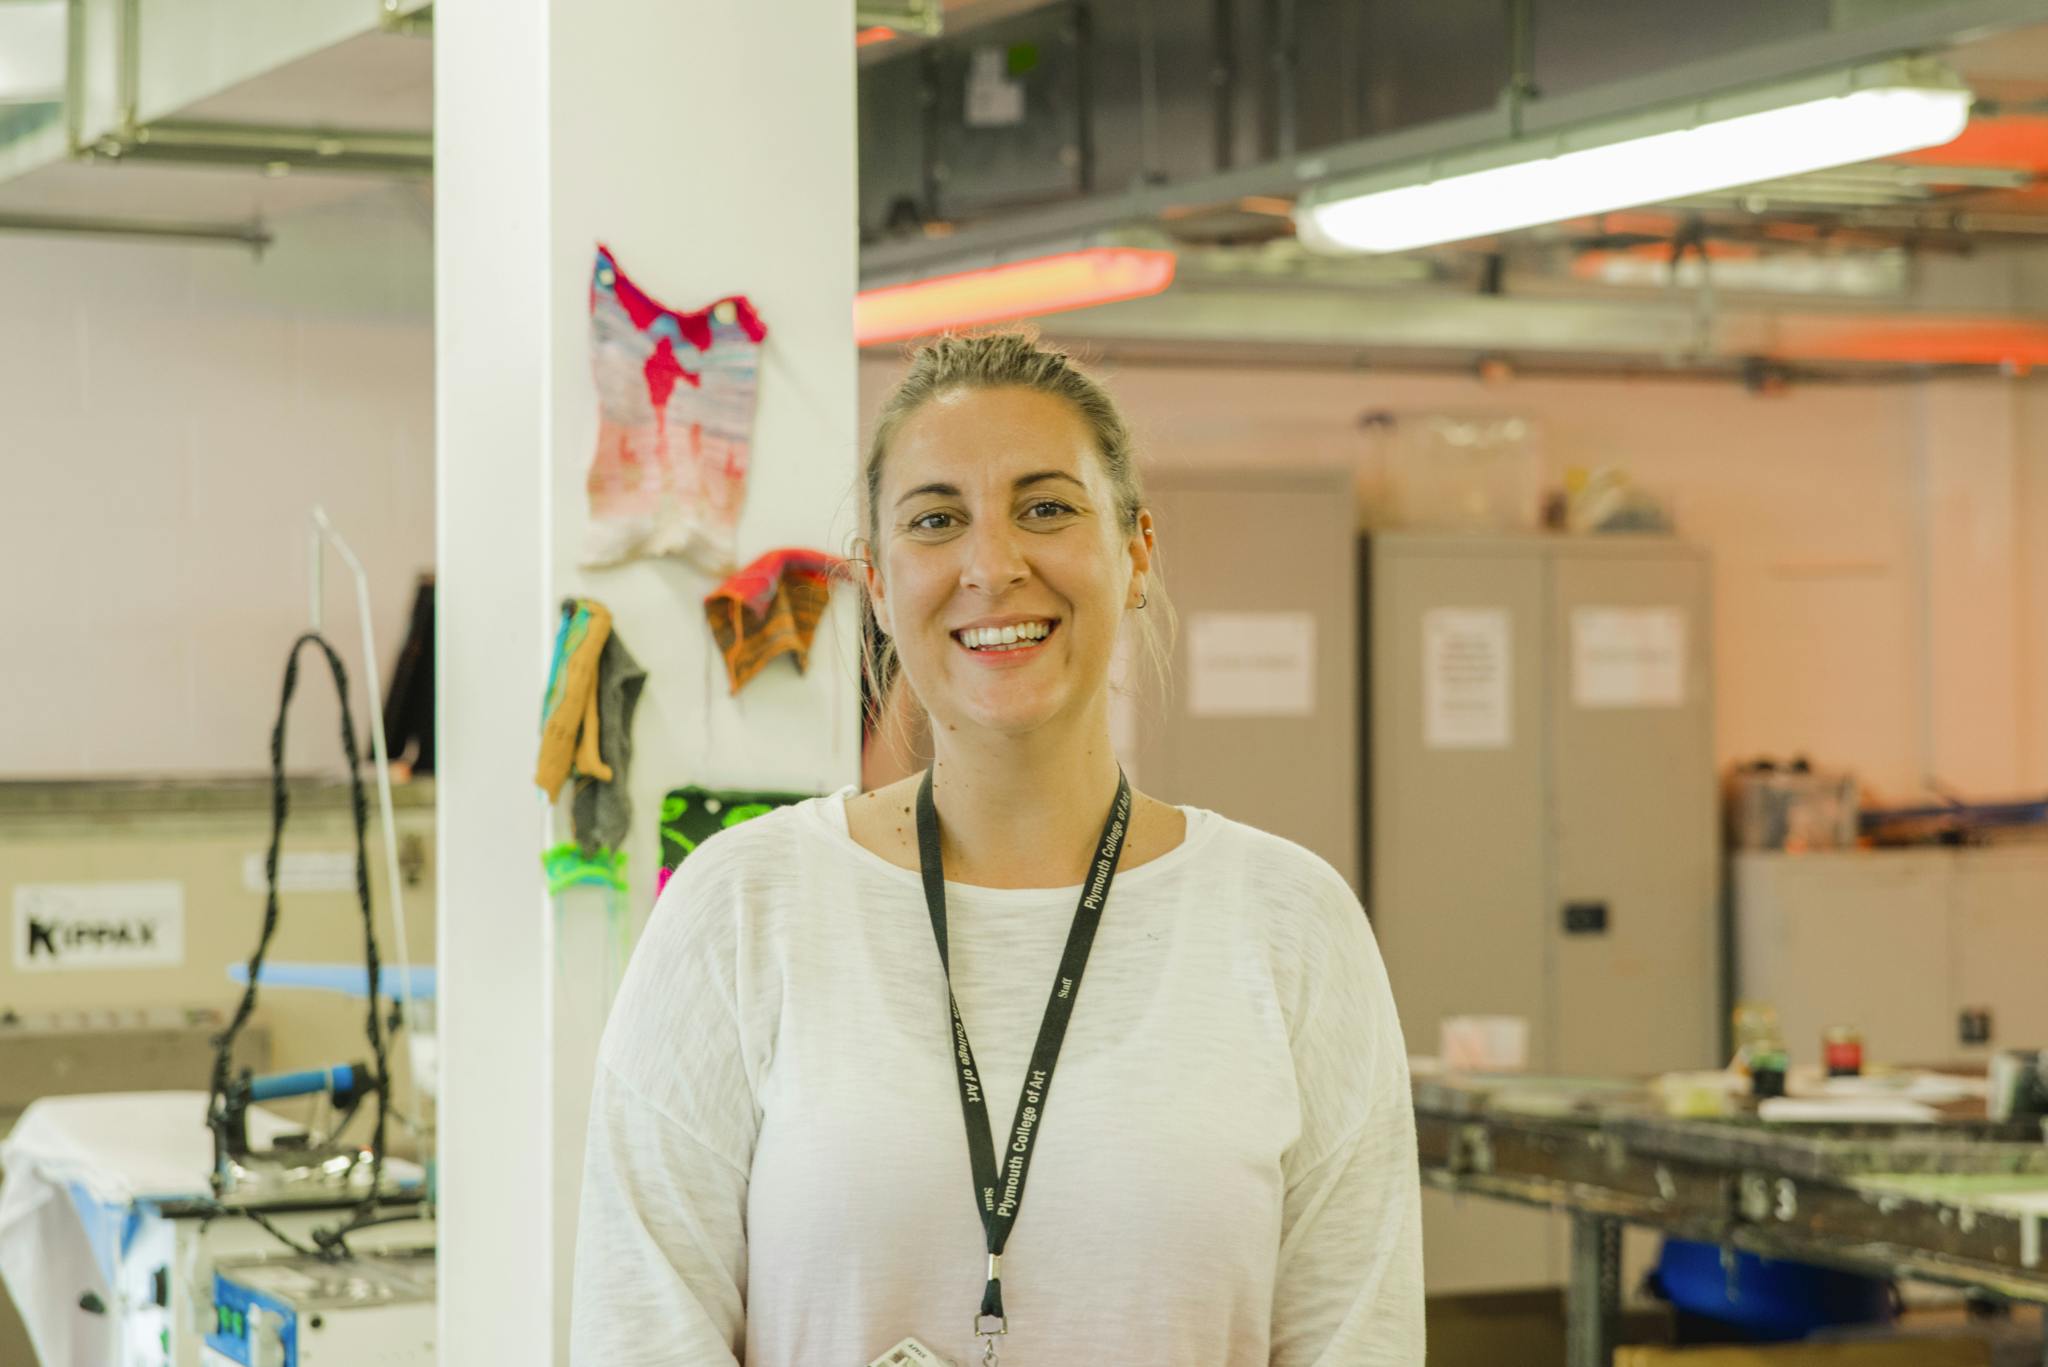 Kathryn Hays wearing a white top and her Plymouth College of Art lanyard stands smiling and relaxed in front of the Fabric Lab, a textiles resource and facility for students